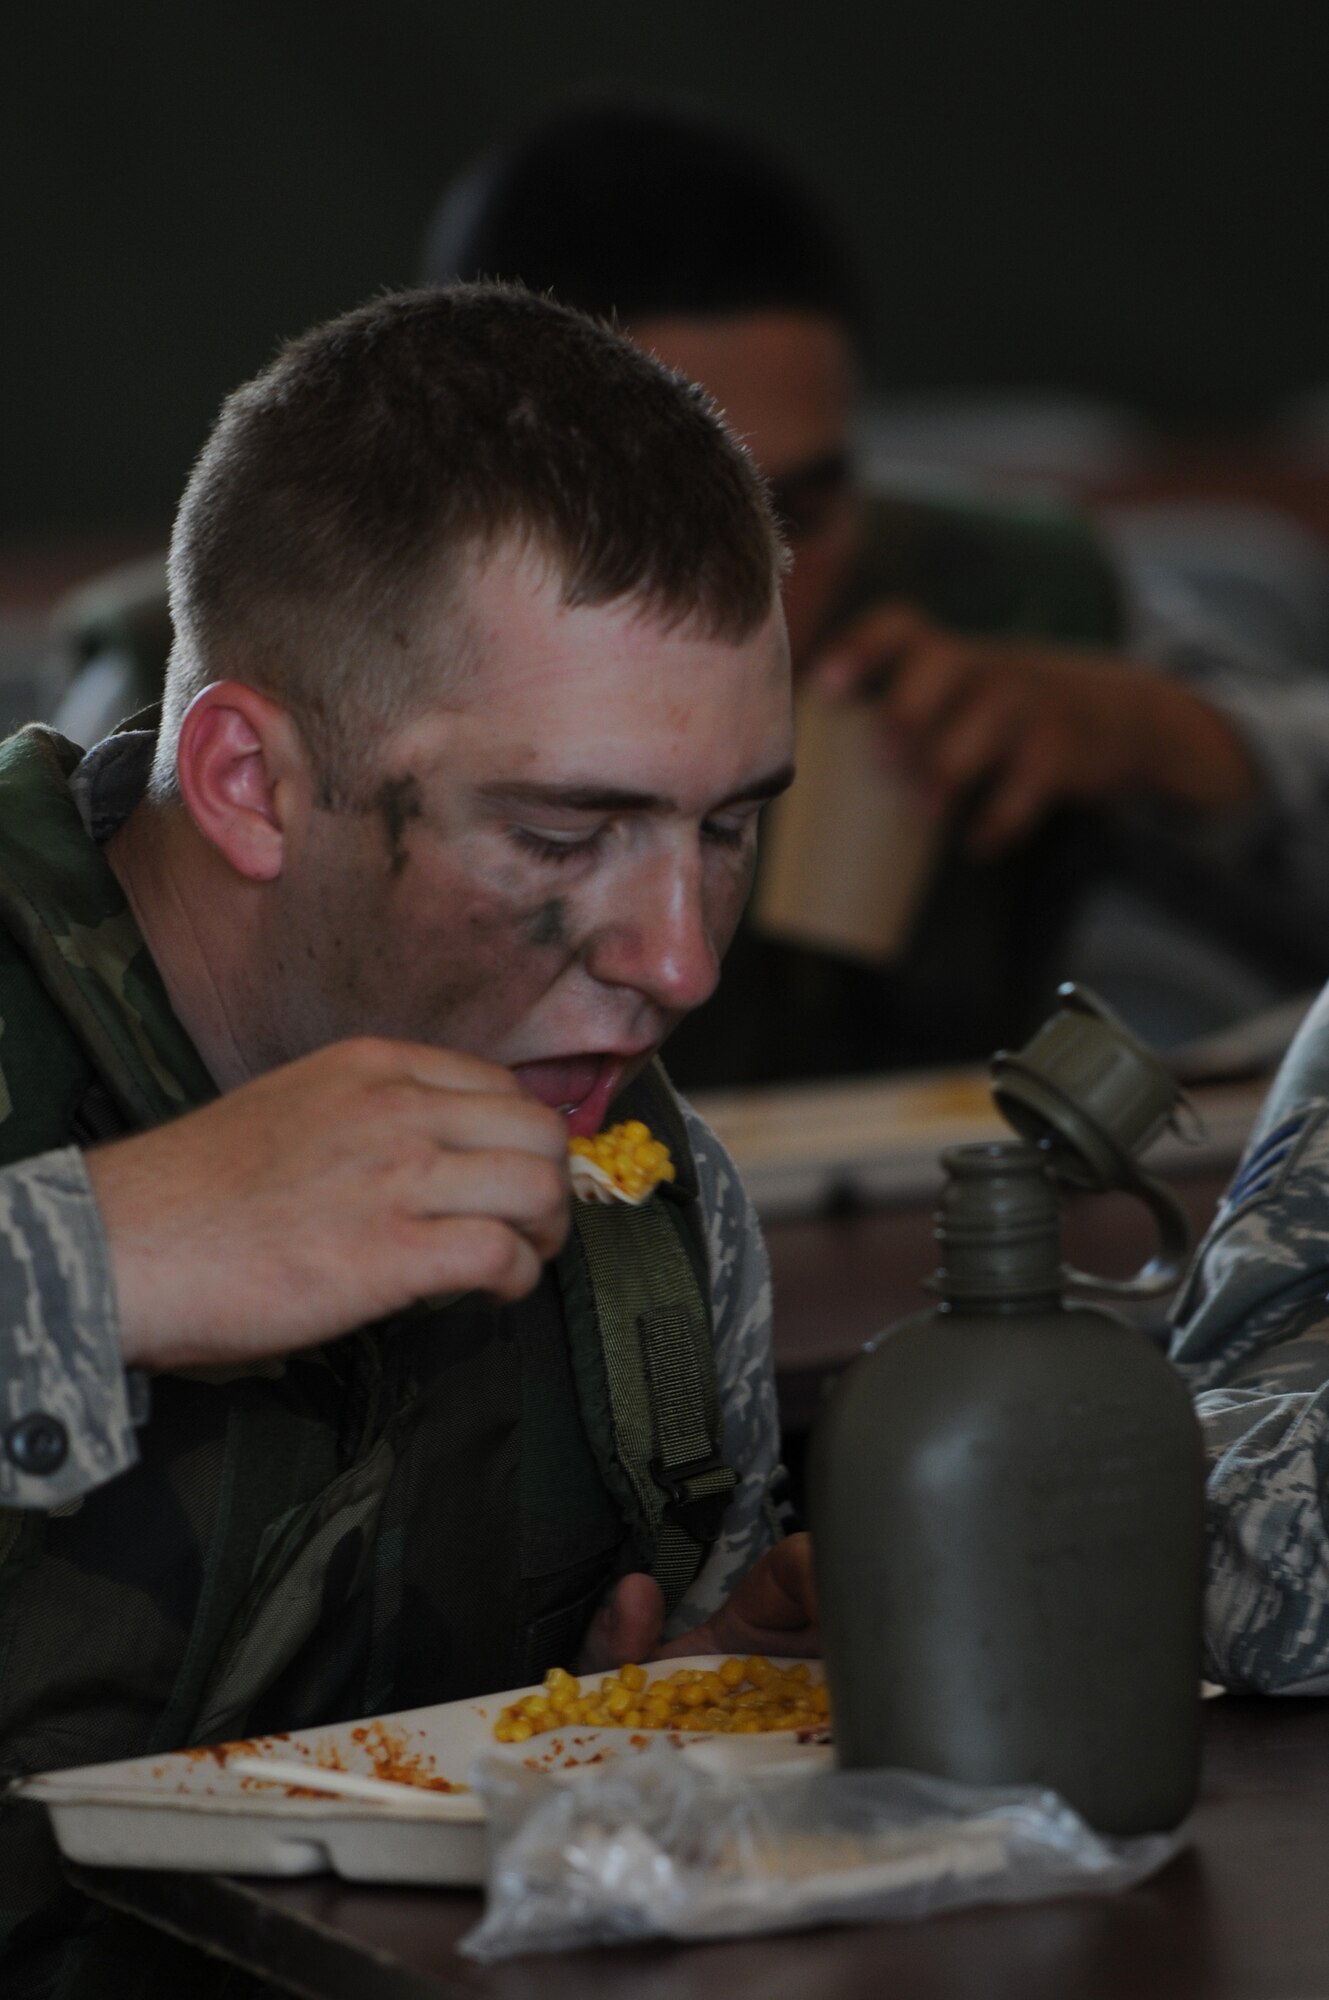 U.S. Air Force Airman 1st Class David Overstreet, 786th Civil Engineer Squadron, eats chow during the Silver Flag exercise on Ramstein Air Base, Germany, Aug. 1, 2009. Members throughout United States Air Forces in Europe participated in the mandated seven day training for civil engineers, services, logistics, medical and personnelists. (U.S. Air Force photo by Airman 1st Class Grovert Fuentes-Contreras)(Released)